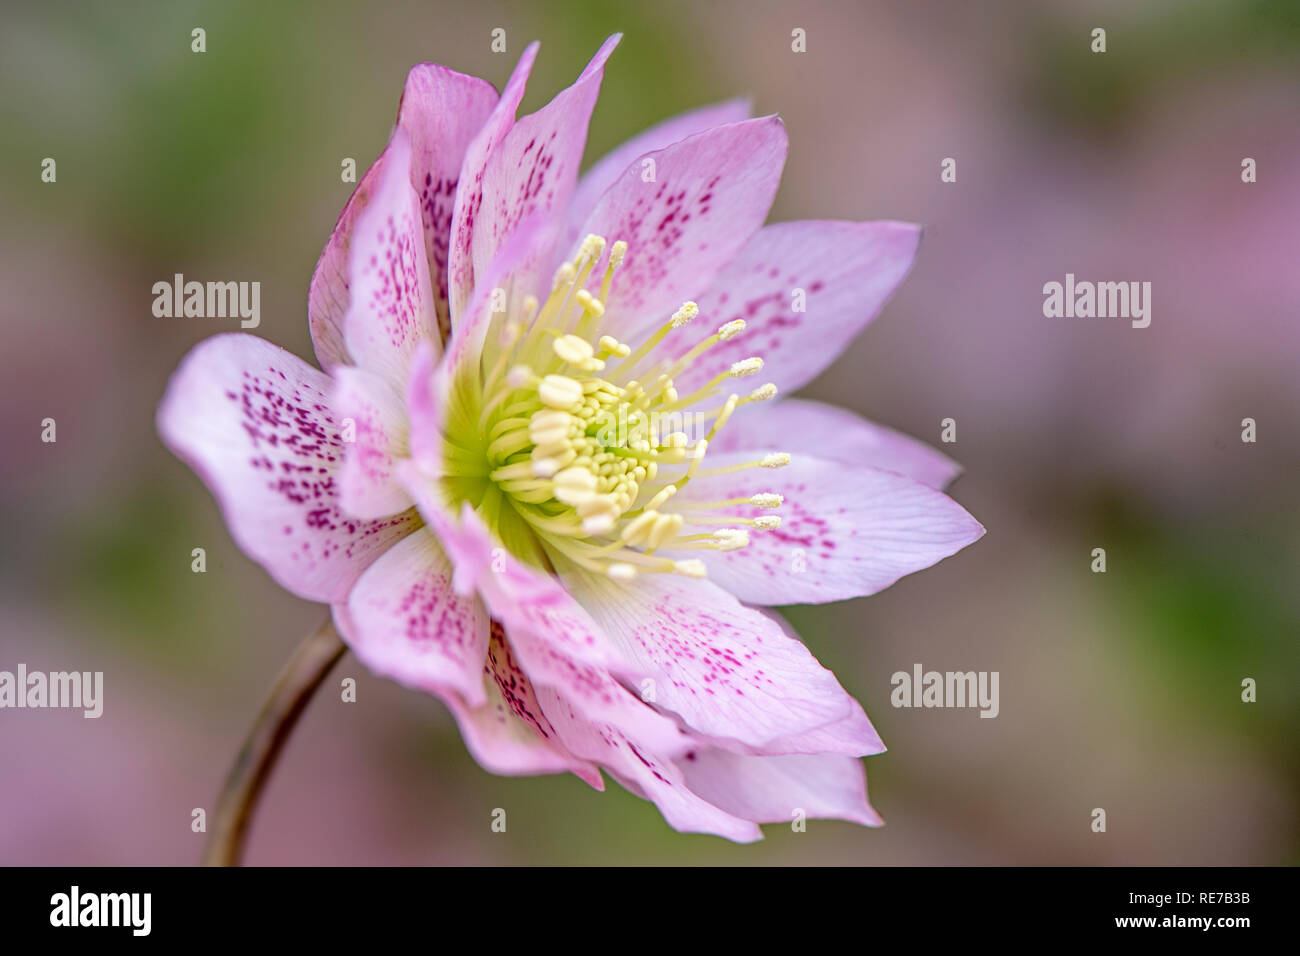 Close-up image of the beautiful winter flowering, pink Hellebore double flower also known as the Lenten Rose or Christmas Rose Stock Photo